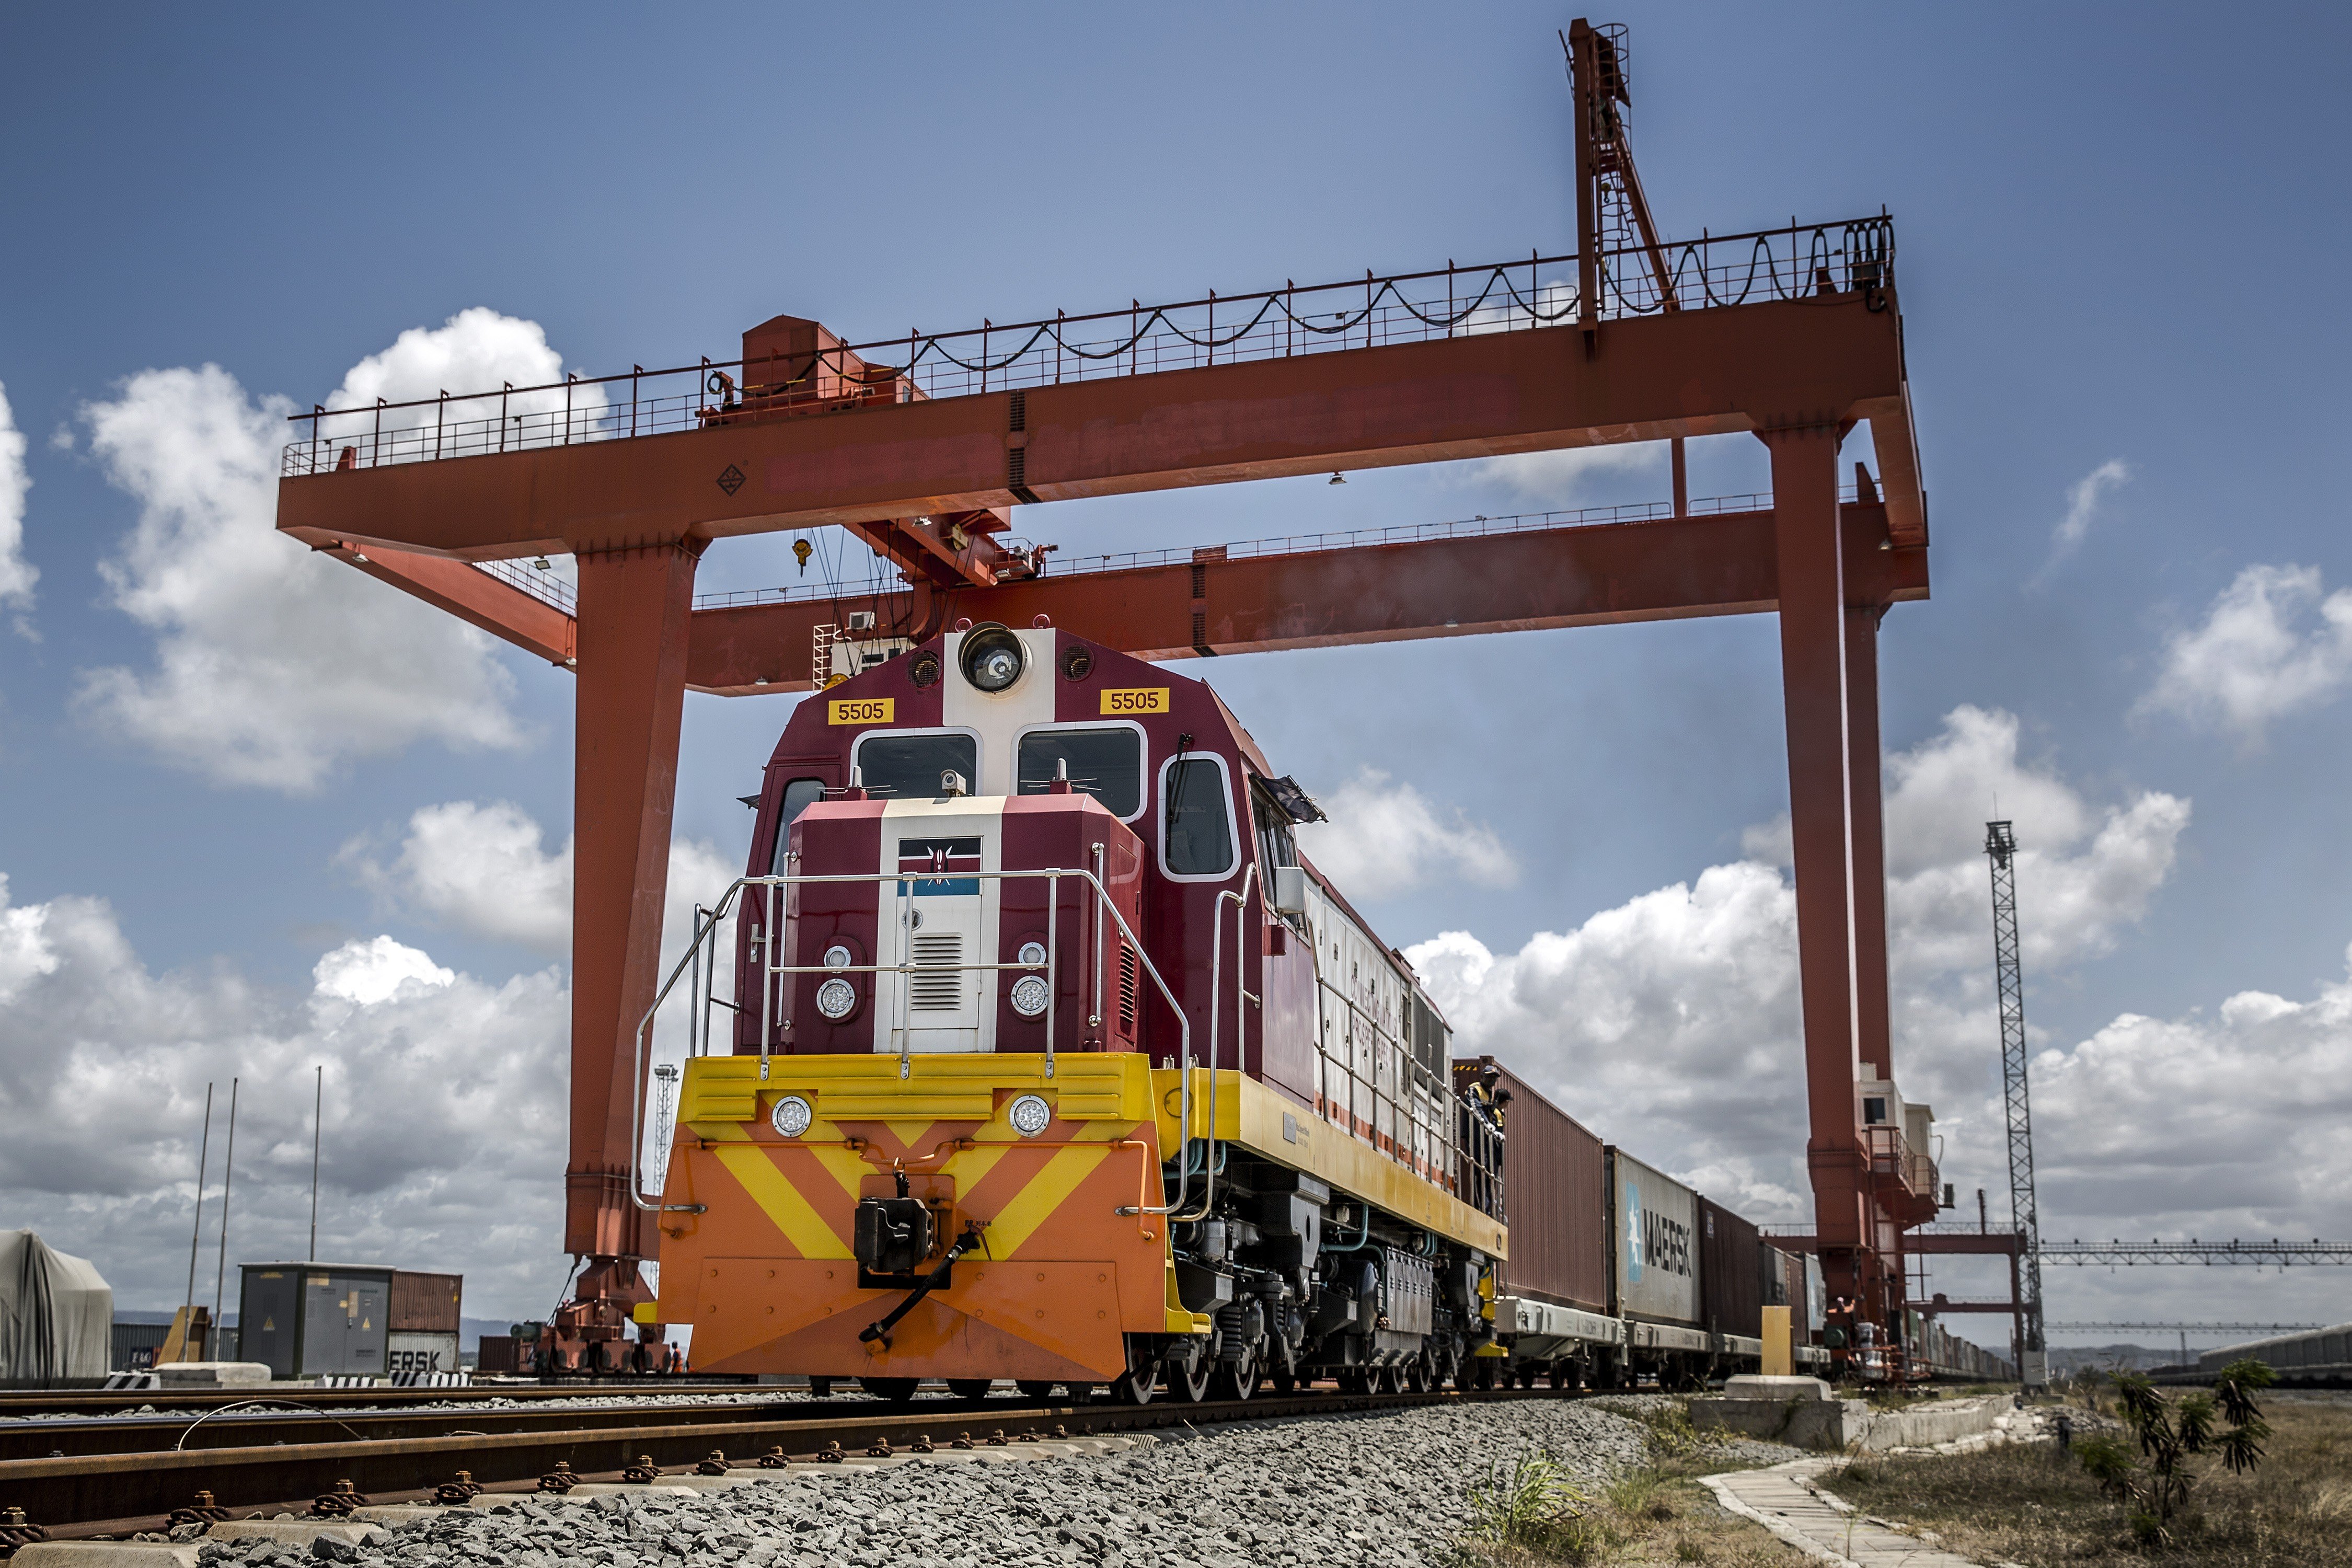 Beijing’s investment in Kenya’s railways under its belt and road global infrastructure plan aims to revive and extend trading routes connecting China with Central Asia, the Middle East, Africa and Europe. Photo: Bloomberg